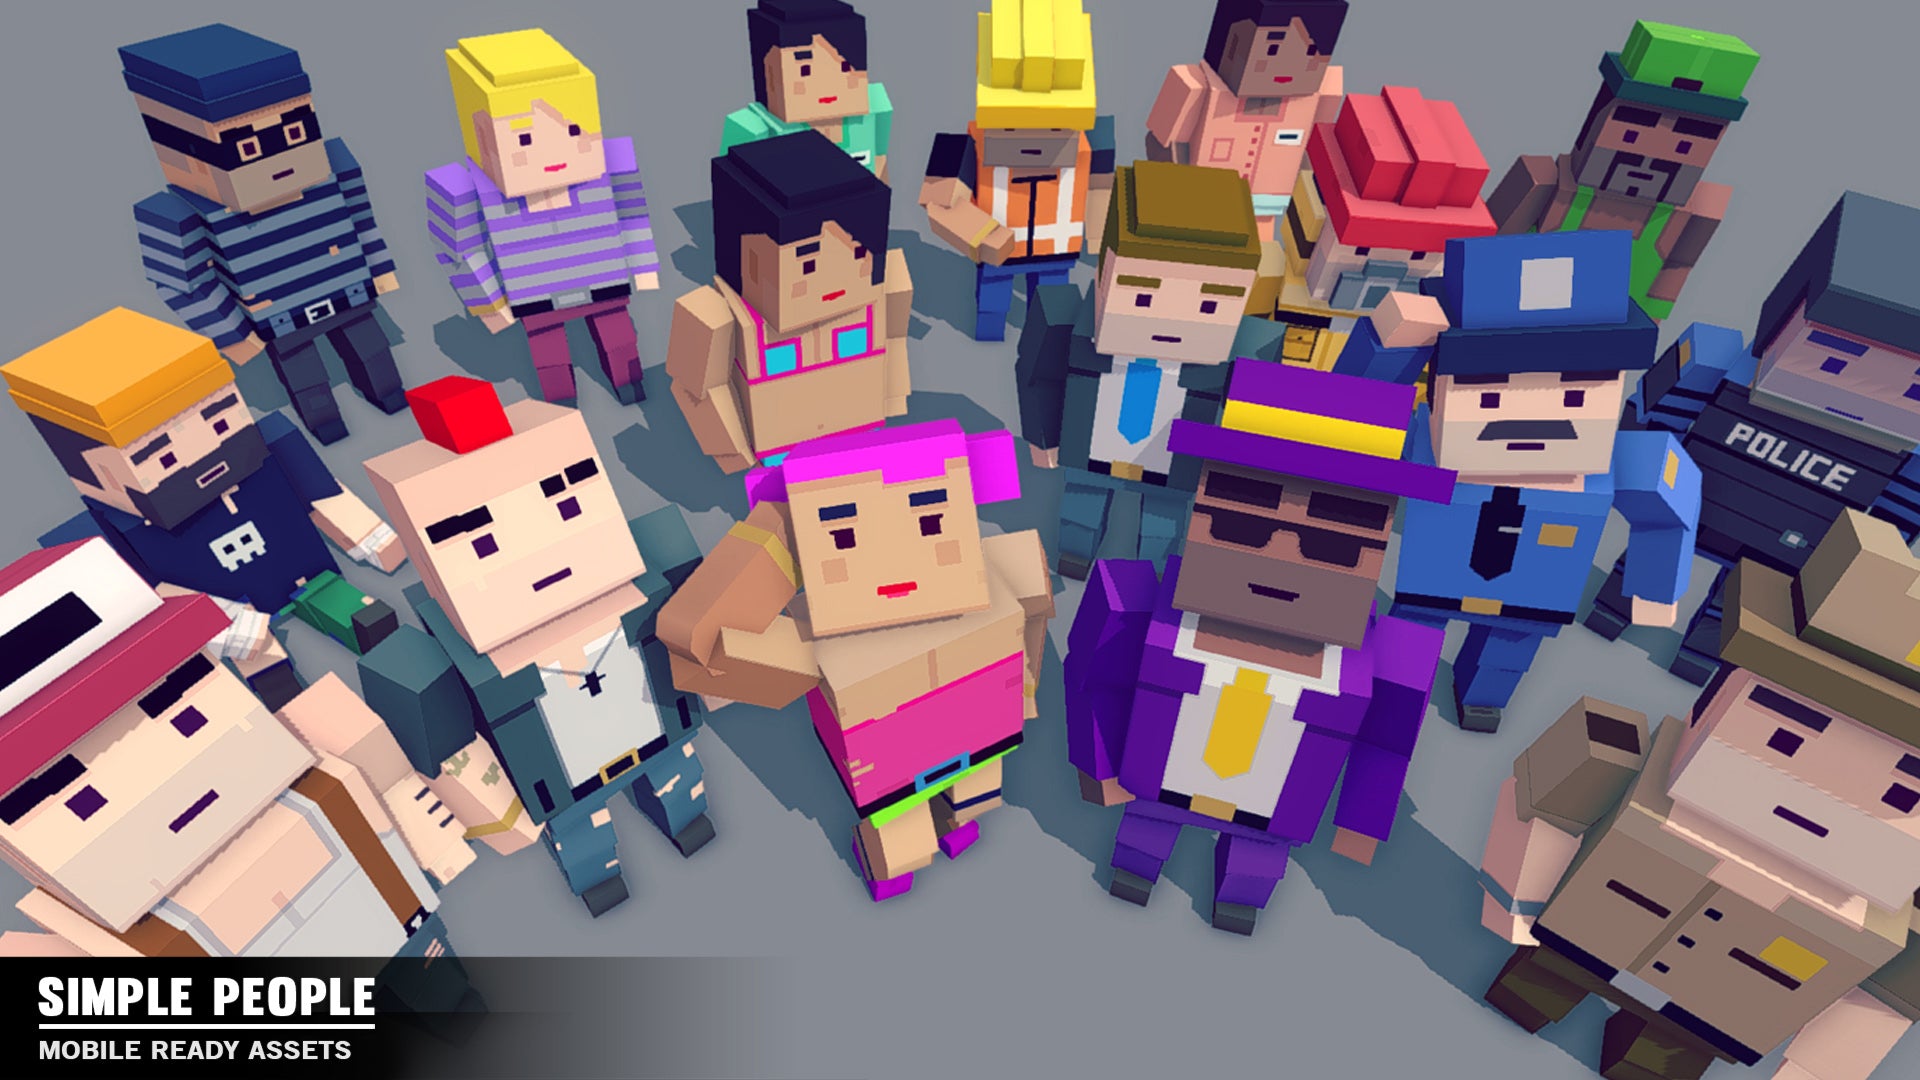 Simple People character options from the asset pack